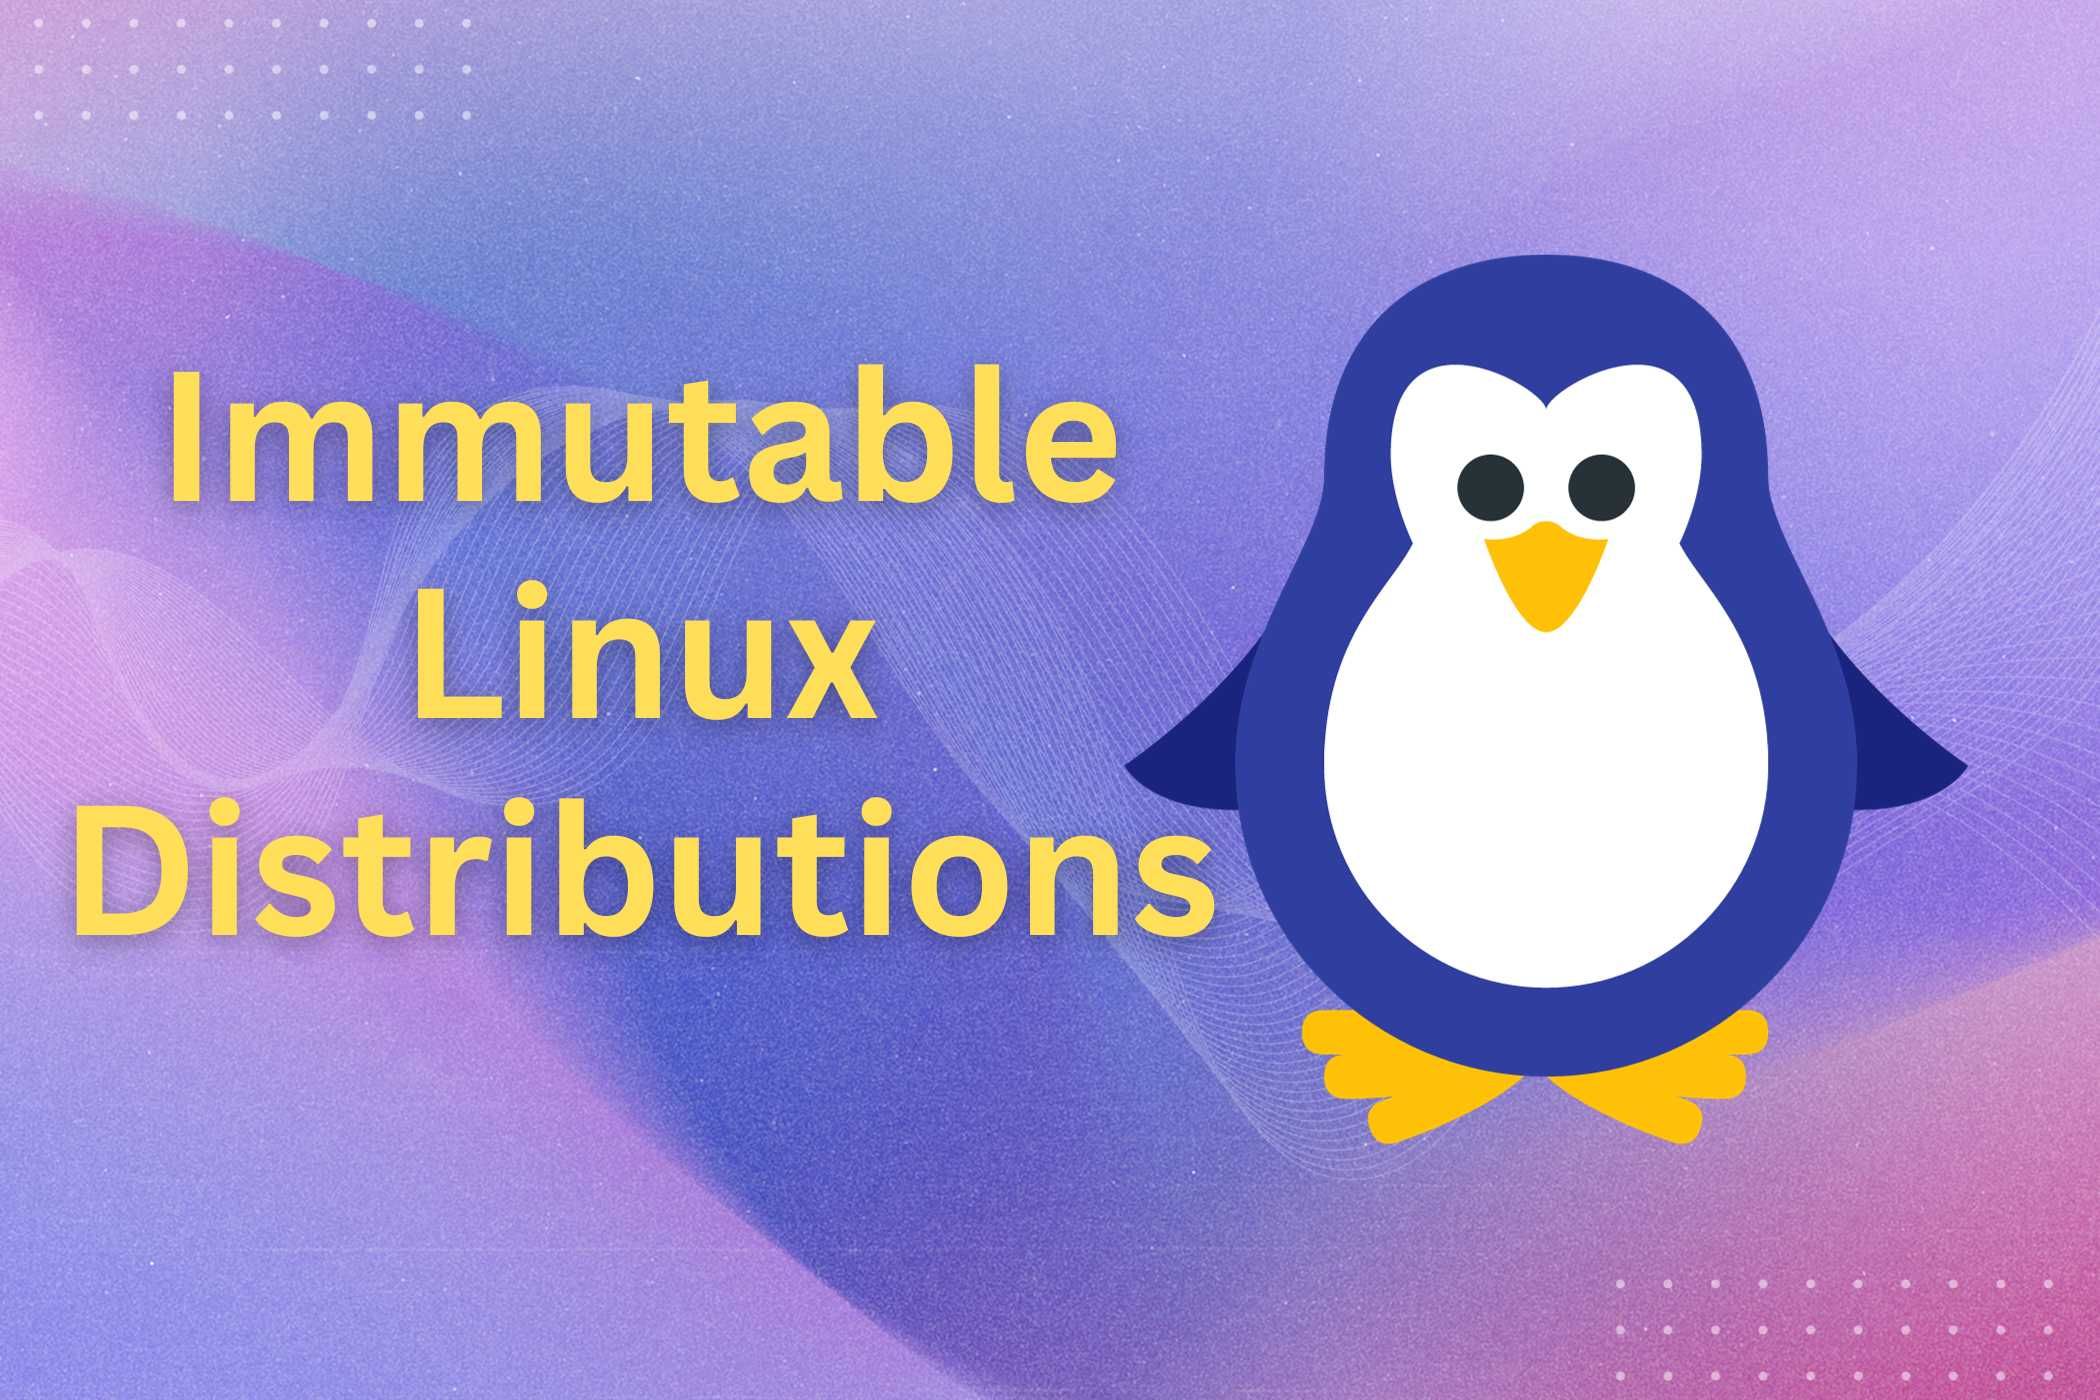 An illustration featuring the Linux mascot, Tux, with the text 'Immutable Linux Distributions'